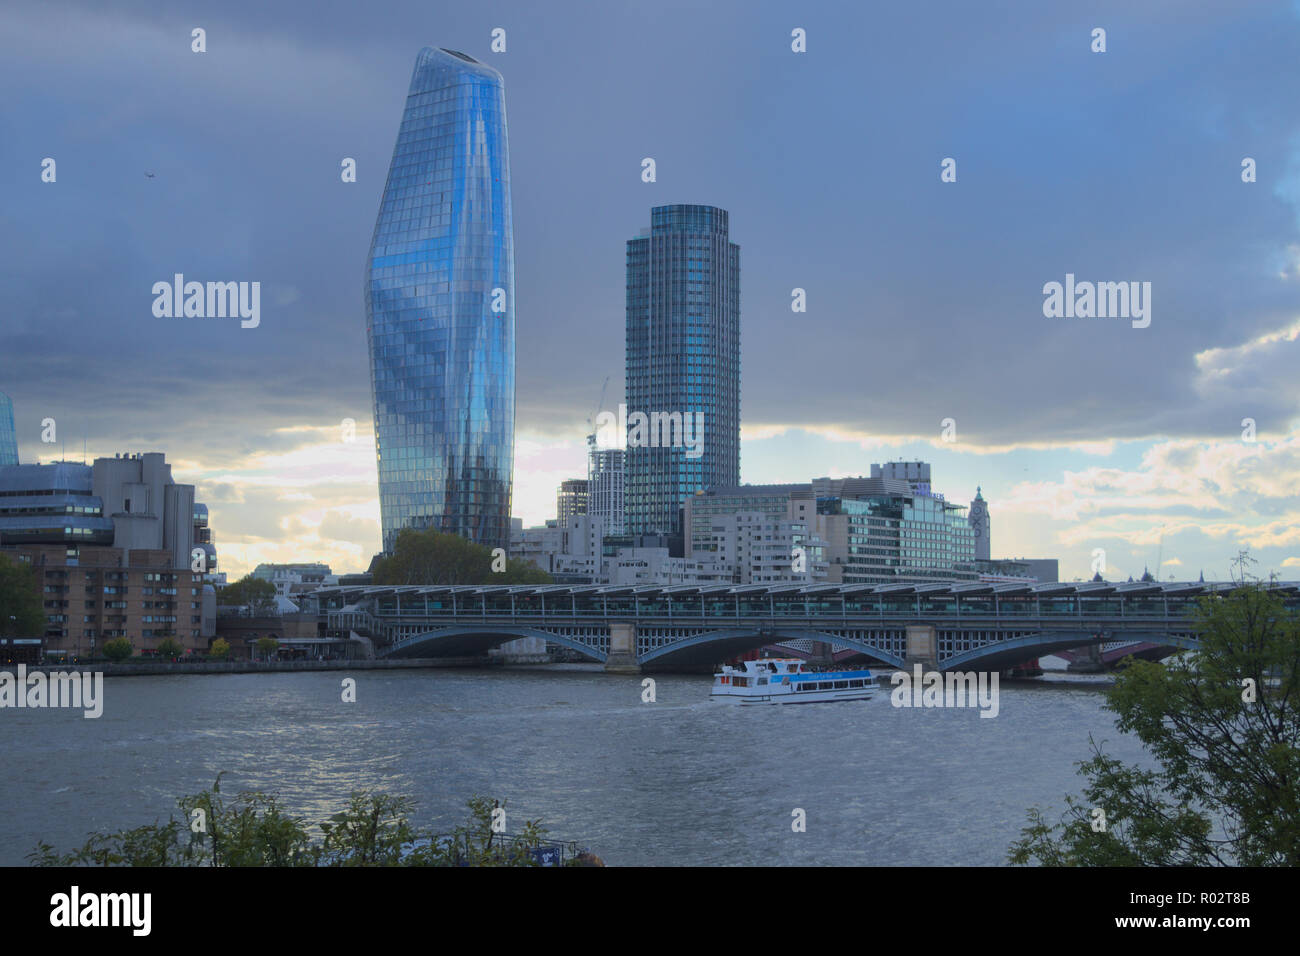 London bankside with modern skyscrappers Stock Photo